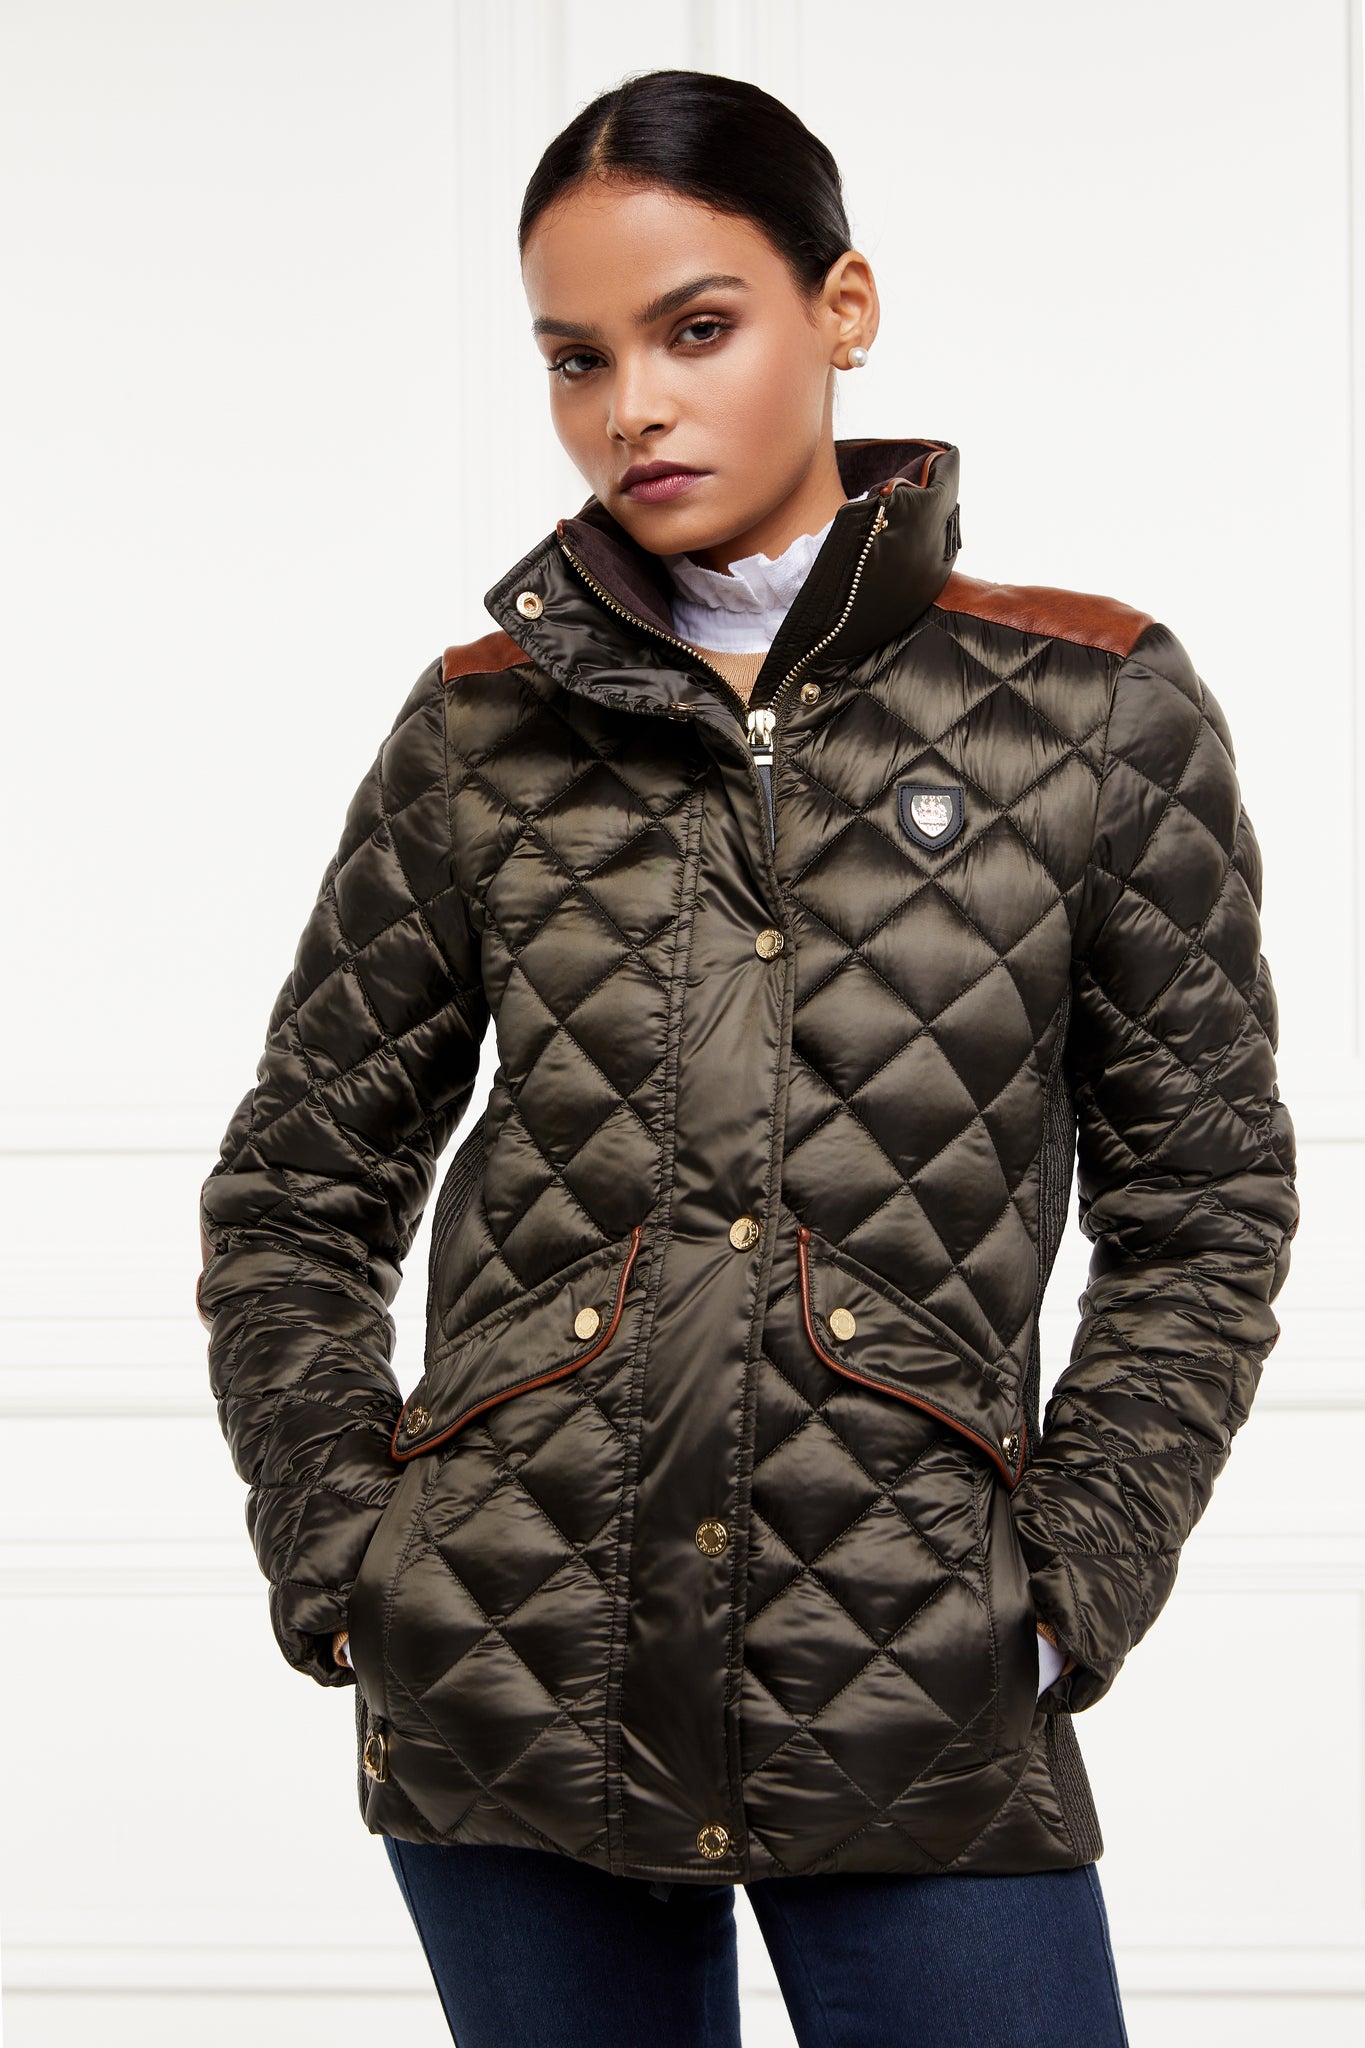 womens diamond quilted khaki jacket with contrast tan leather elbow and shoulder pads large front pockets and shirred side panels